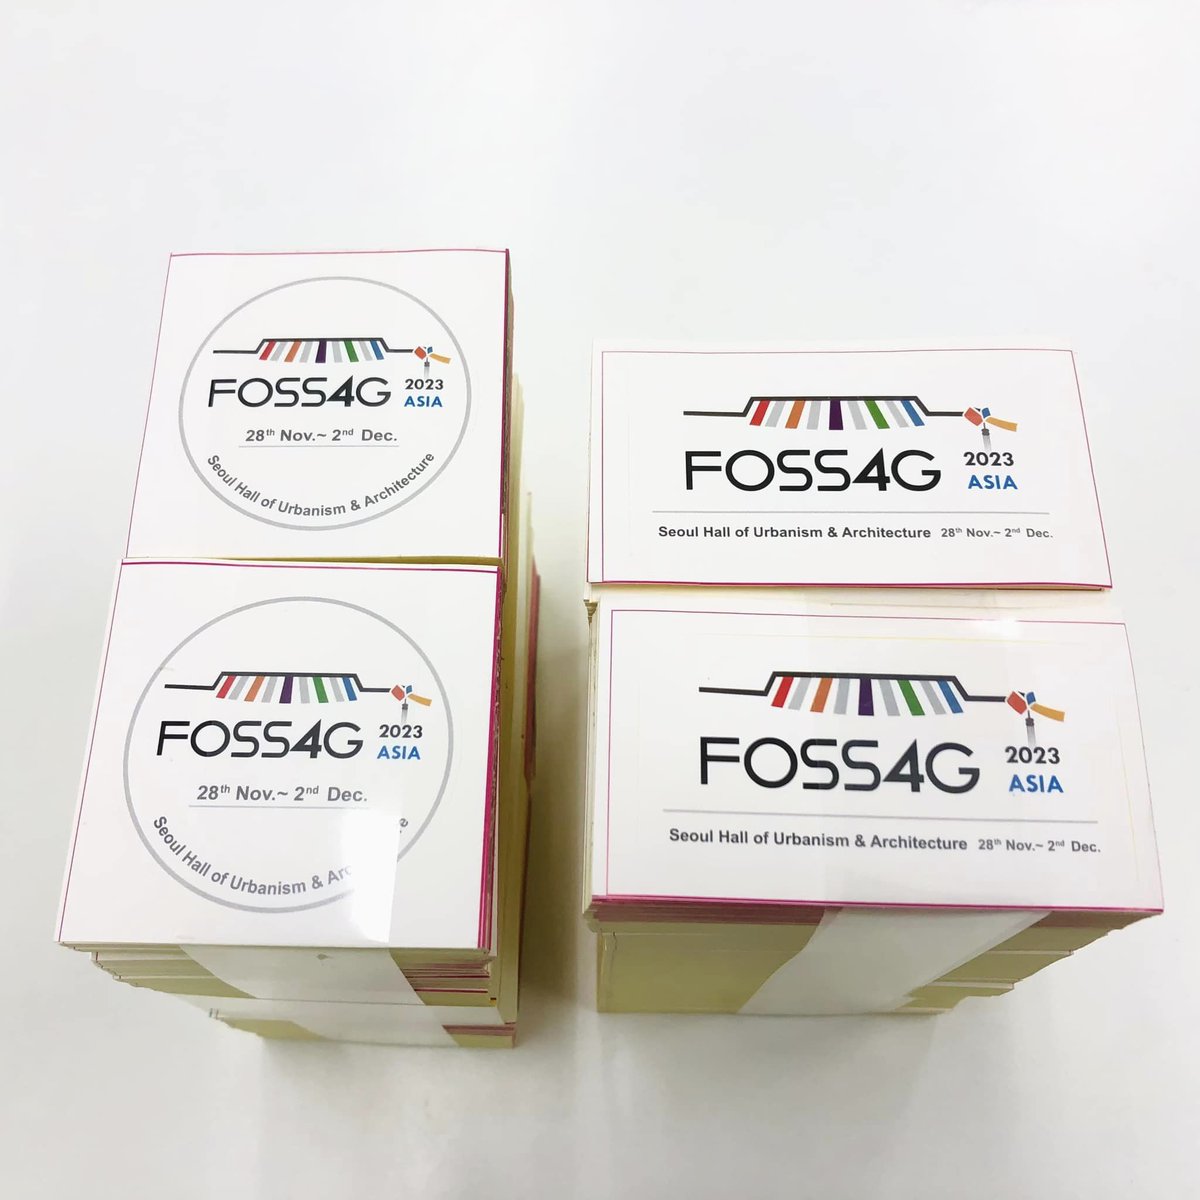 #OSGeo Korea has printed #FOSS4G-Asia promotional stickers. If you want to receive stickers for promoting the event, let me know. We'll cover the postage & send the stickers to you. FOSS4G-Asia 2023 will be held in Seoul from November 28th to December 2nd. foss4g.asia/2023